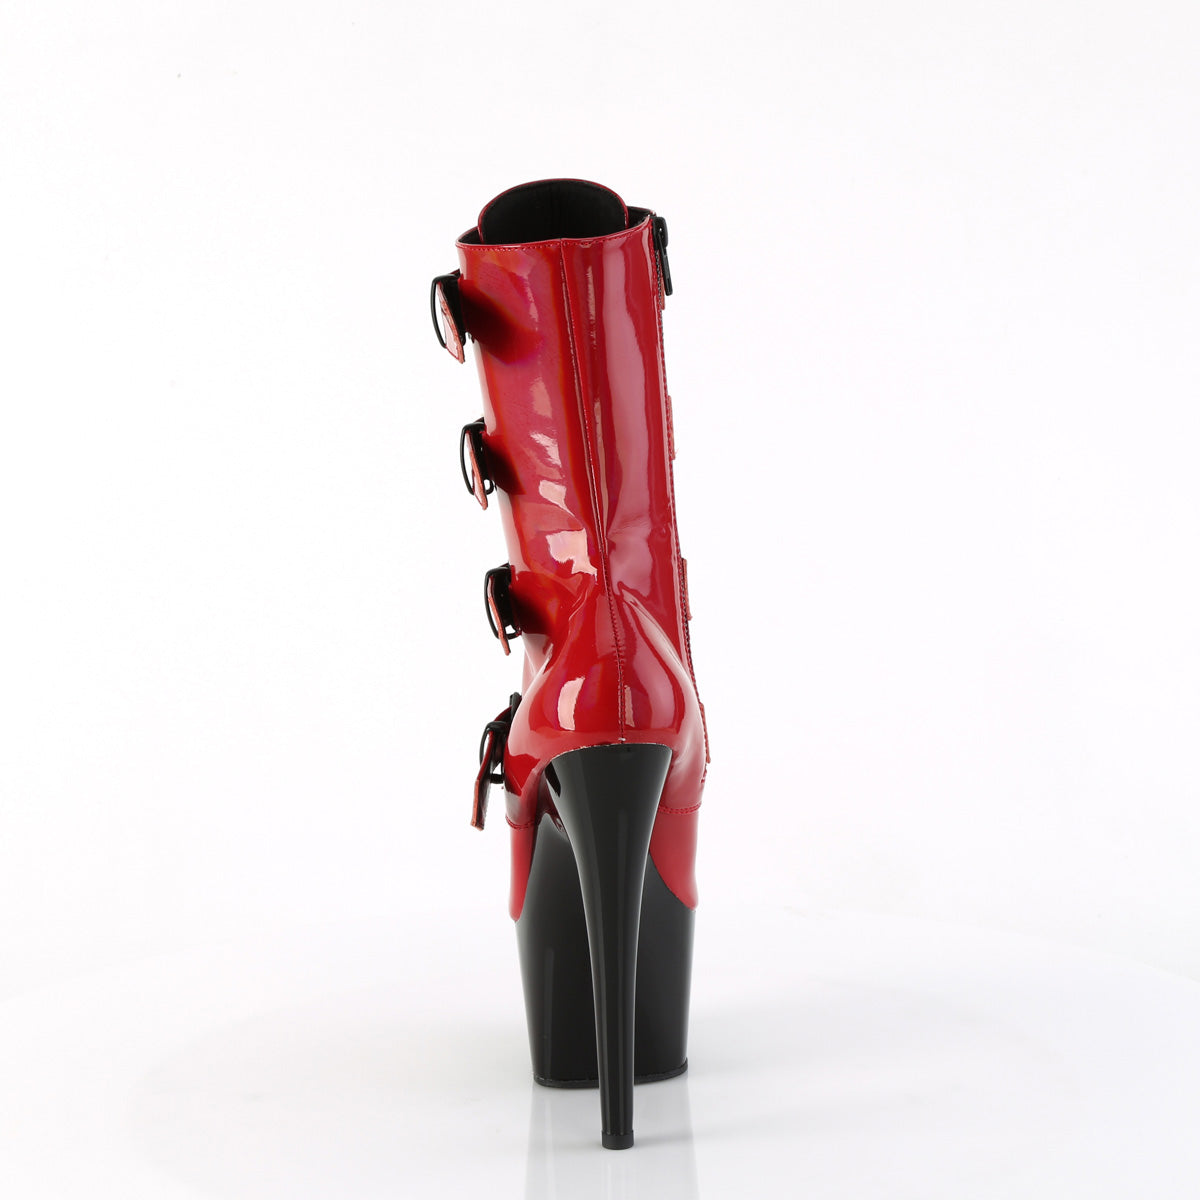 ADORE-1046TT Pleaser Red Holo Patent/Black Platform Shoes [Exotic Dance Ankle Boots]